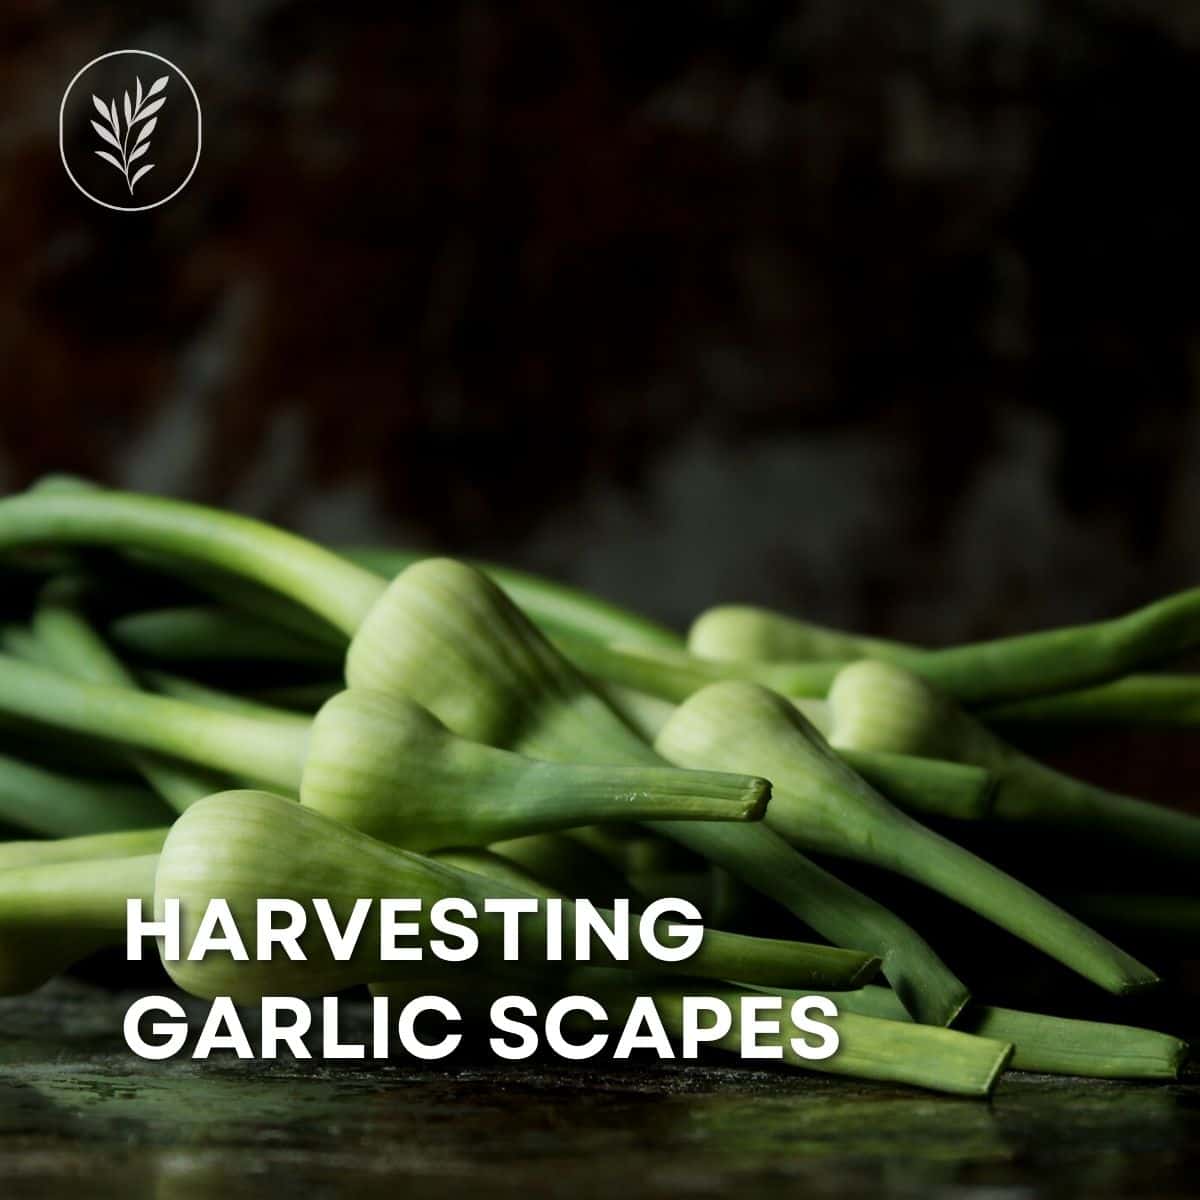 Harvesting garlic scapes is one of the annual garden milestones i most look forward to. Here's when and how to cut your garlic scapes for the healthiest plants (and most delicious scapes! ). Via @home4theharvest